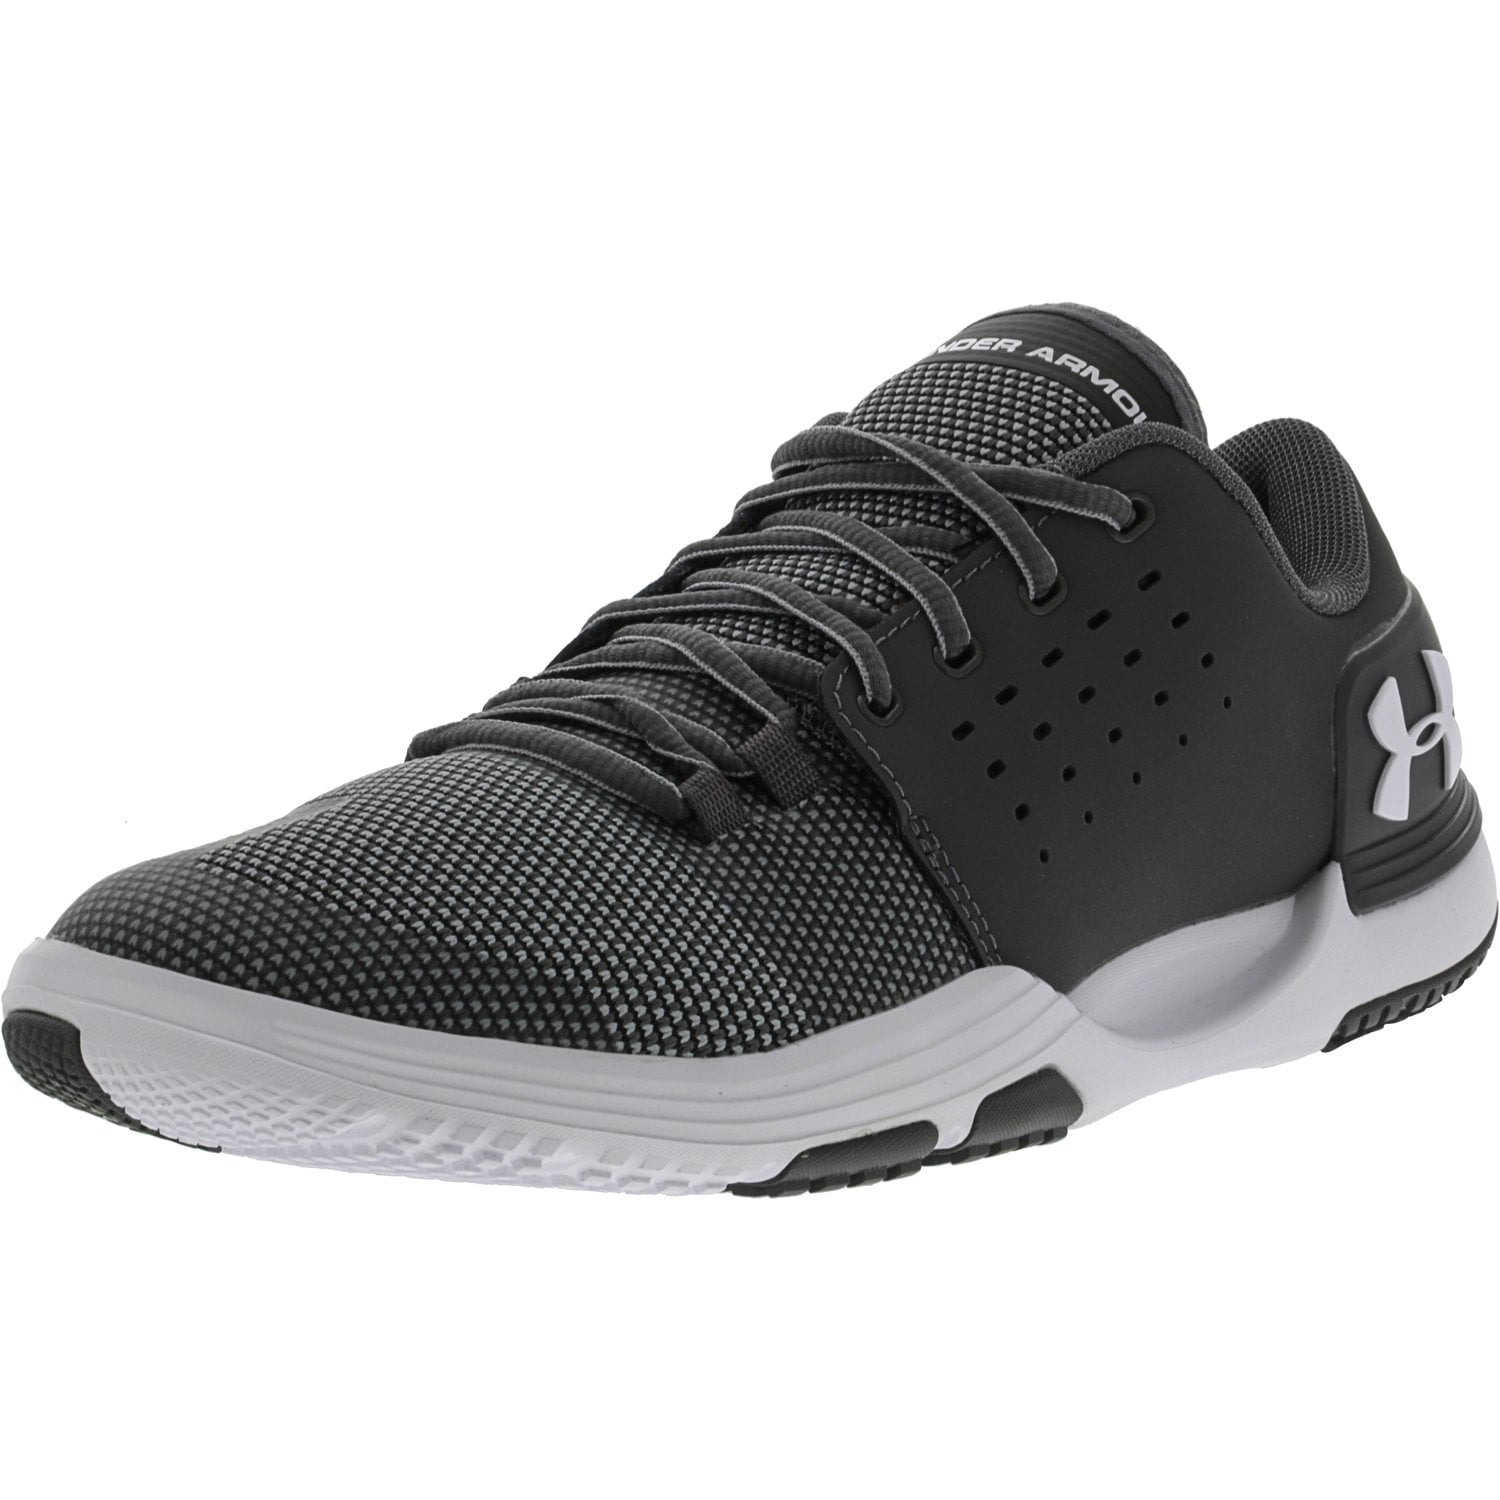 under armour limitless tr 3.0 training shoe